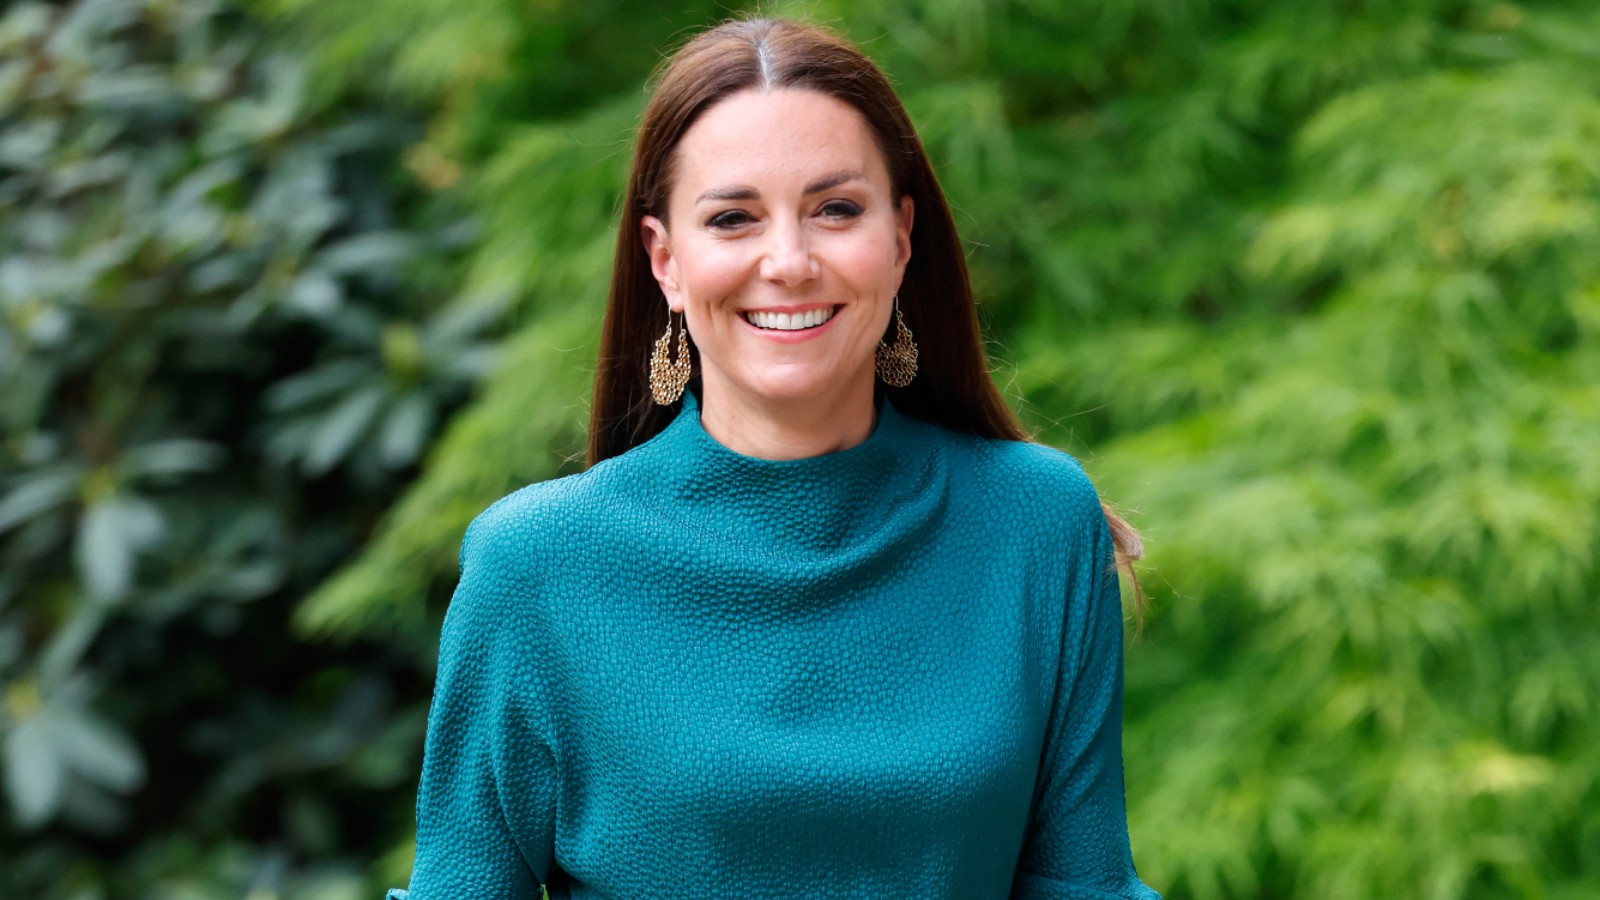 Kate Middleton hiring a personal assistant, how to apply | Woman & Home